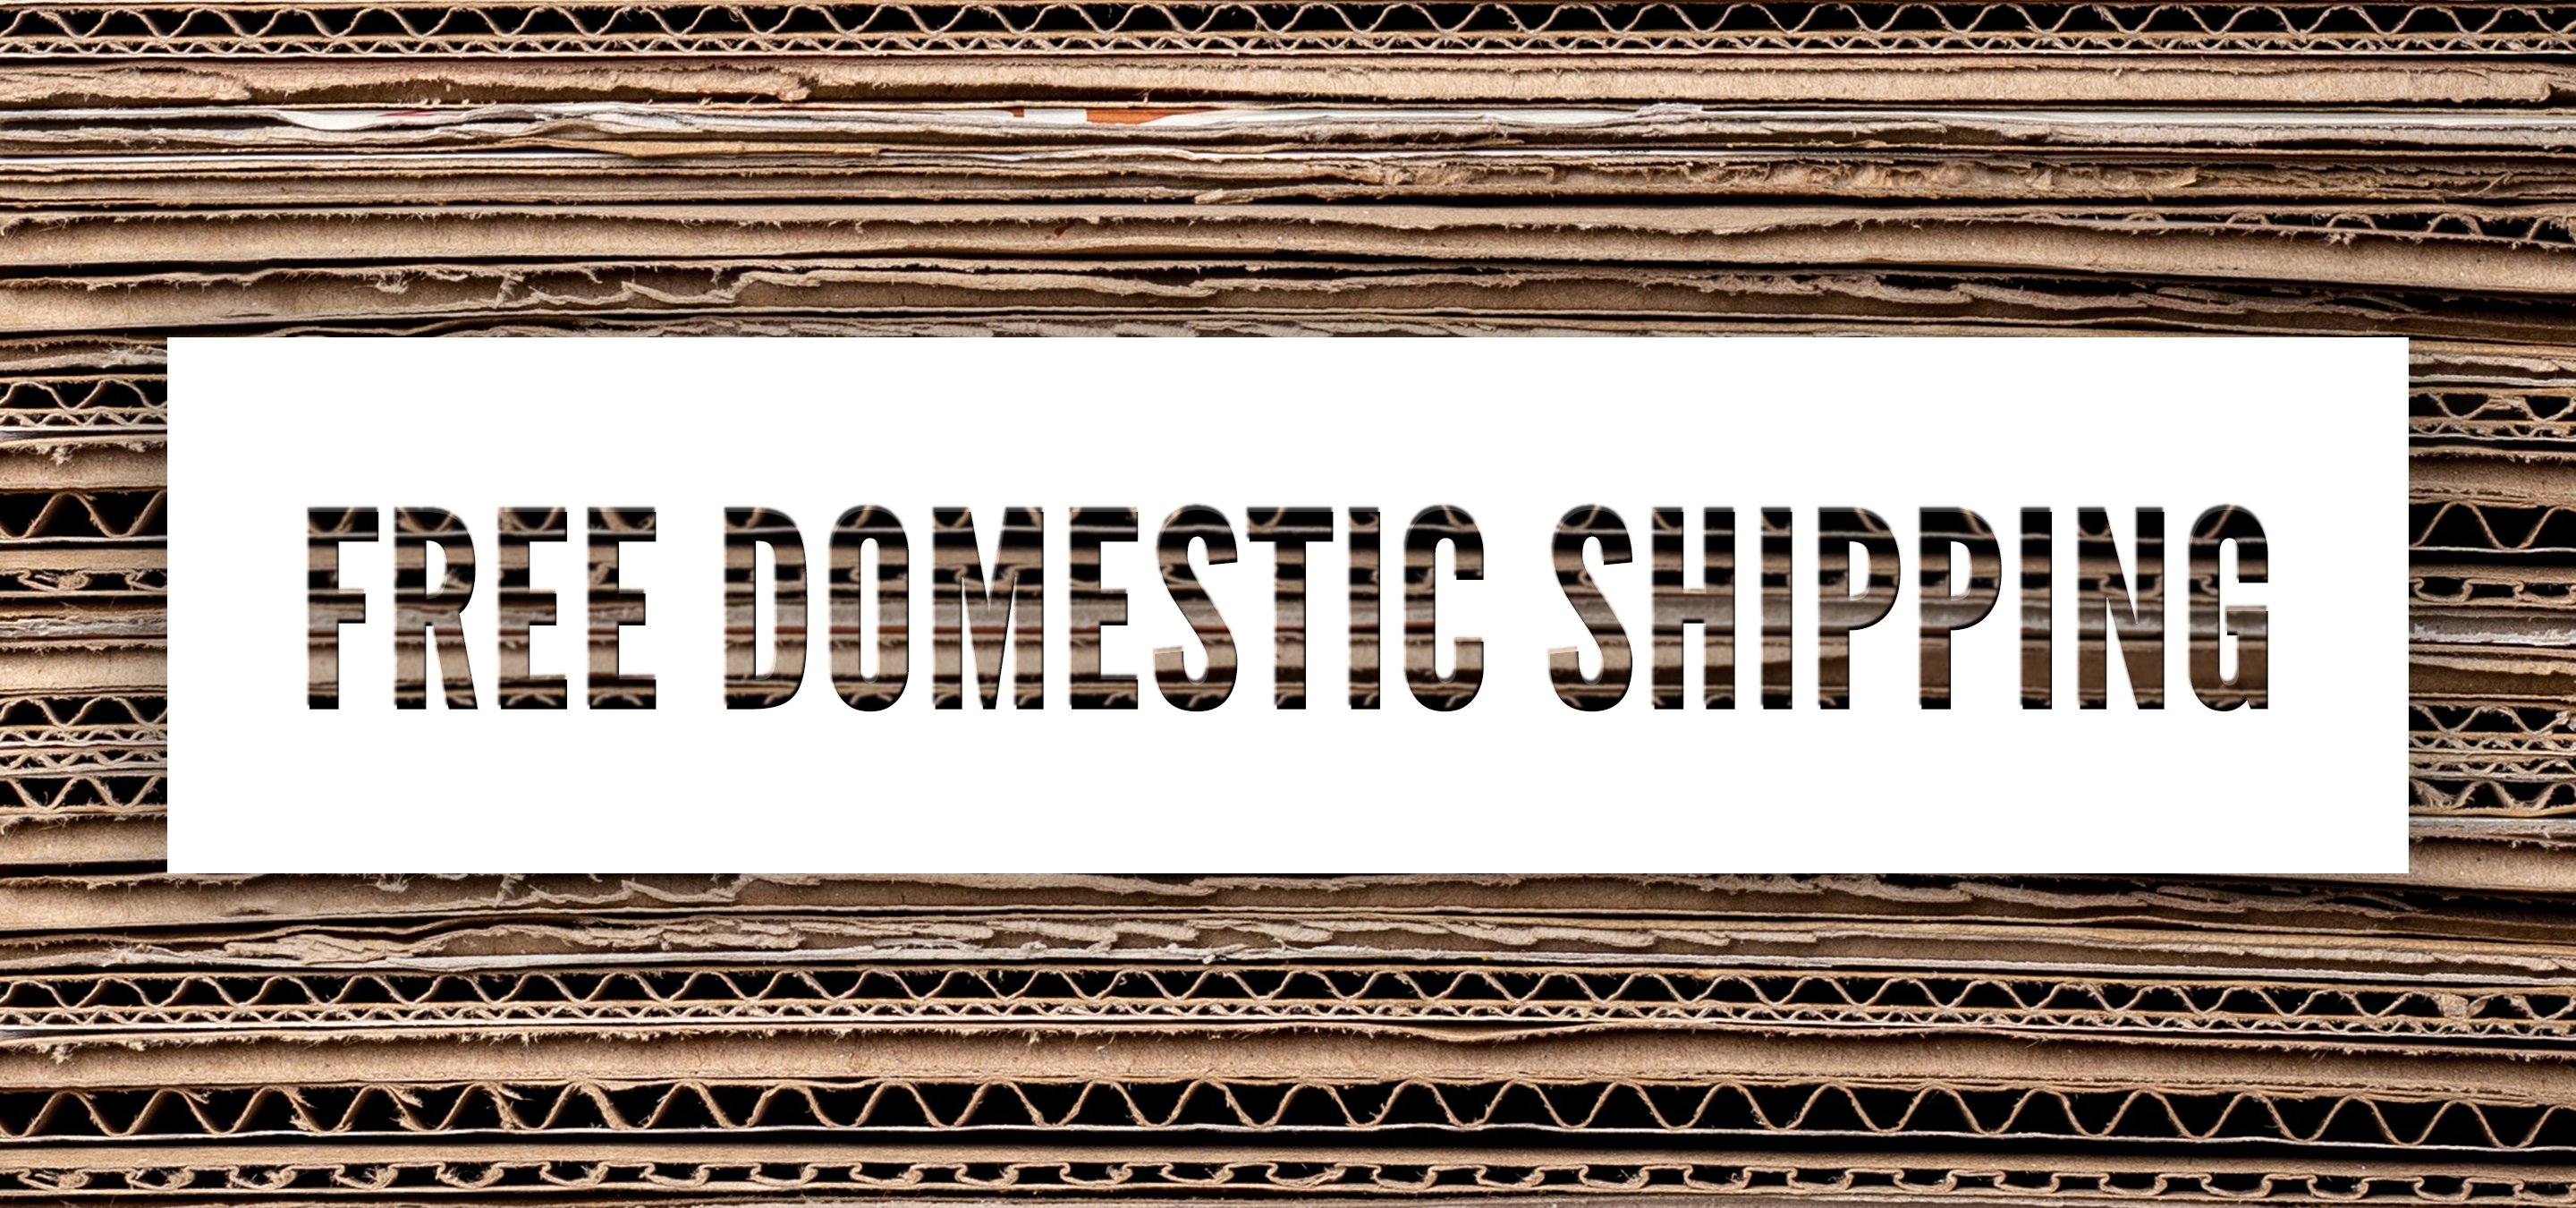 Free Domestic Shipping Featured